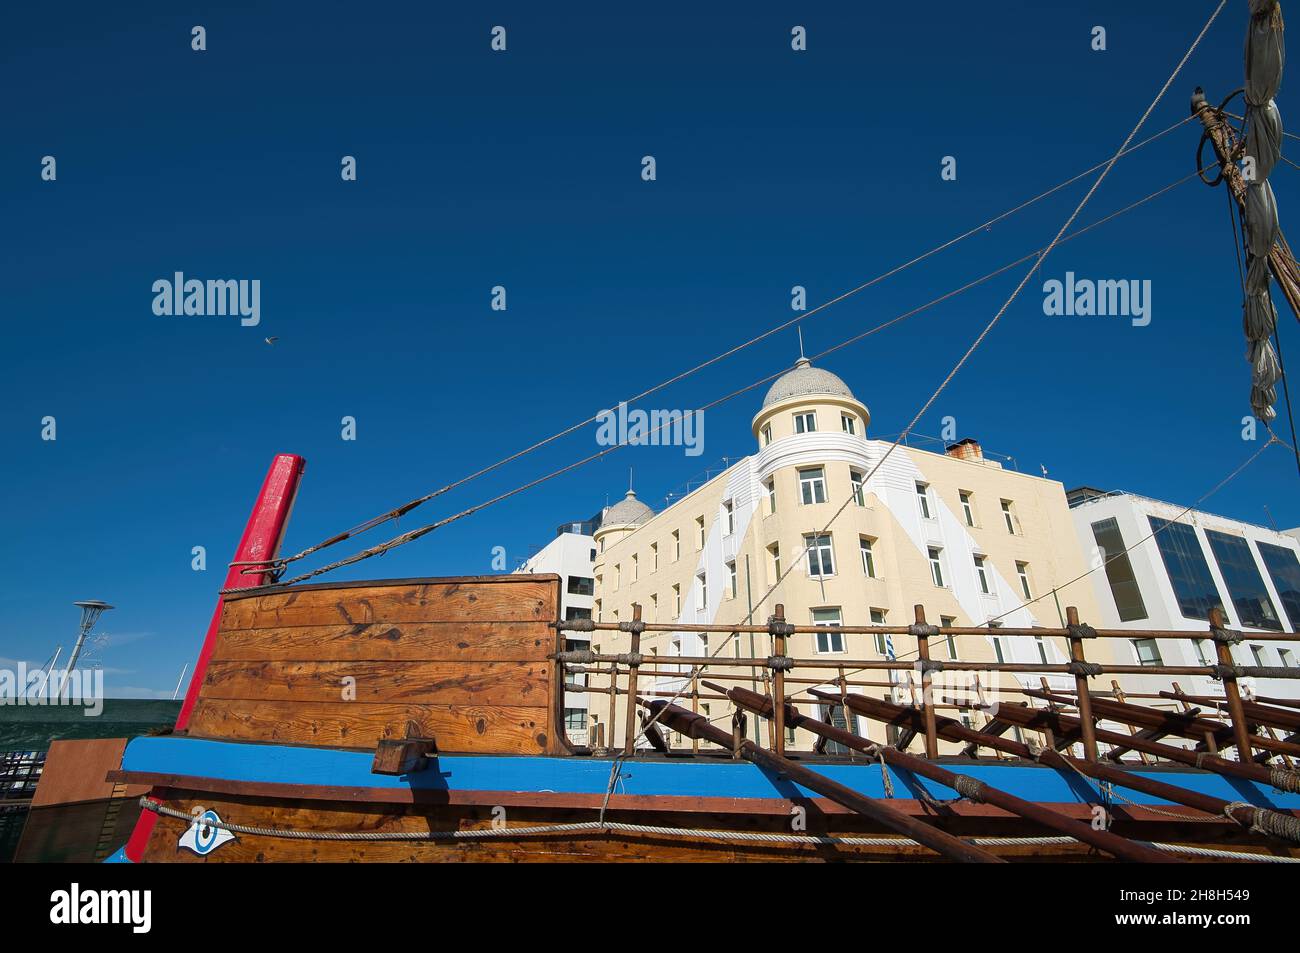 Volos city,  beautiful waterfront with the emblem of the city, mythical ship Argo Stock Photo